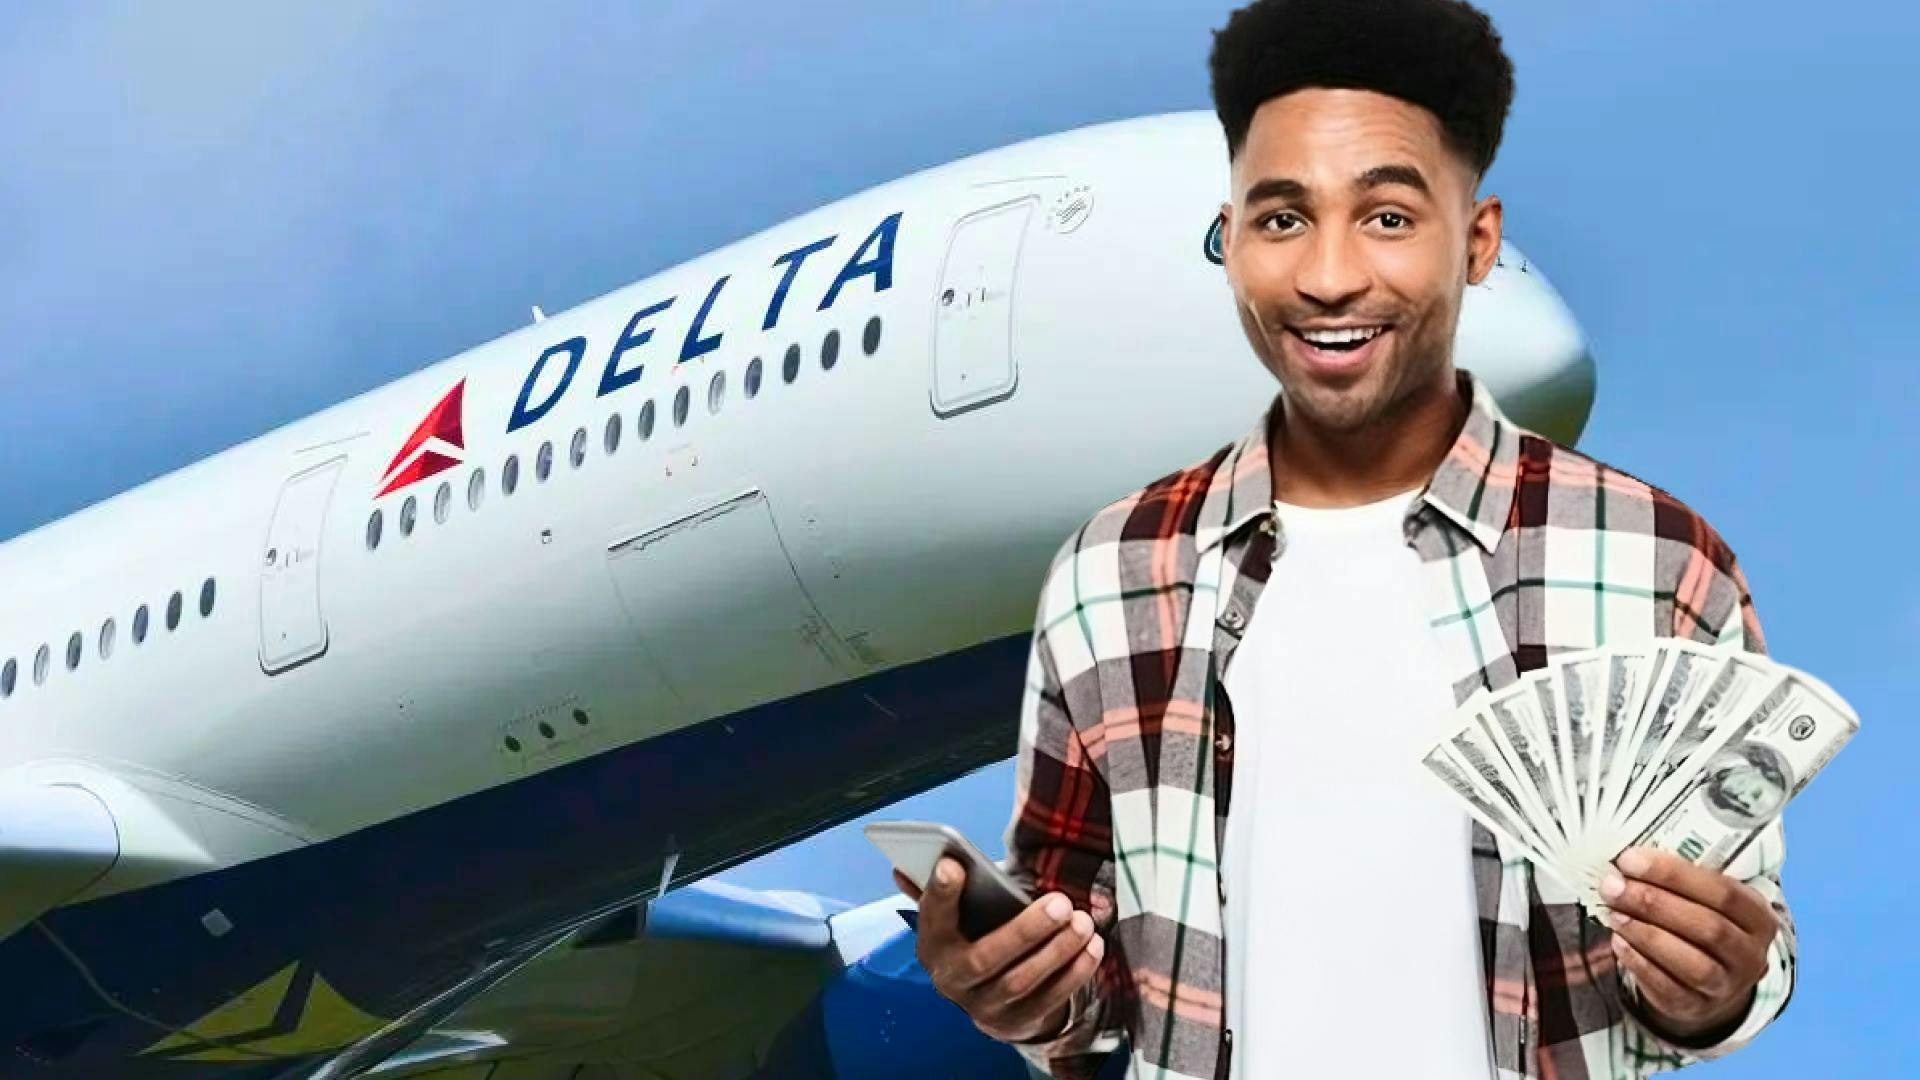 Delta Announces Pay Raises and Starting Wage Increase to Boost Employee Compensation